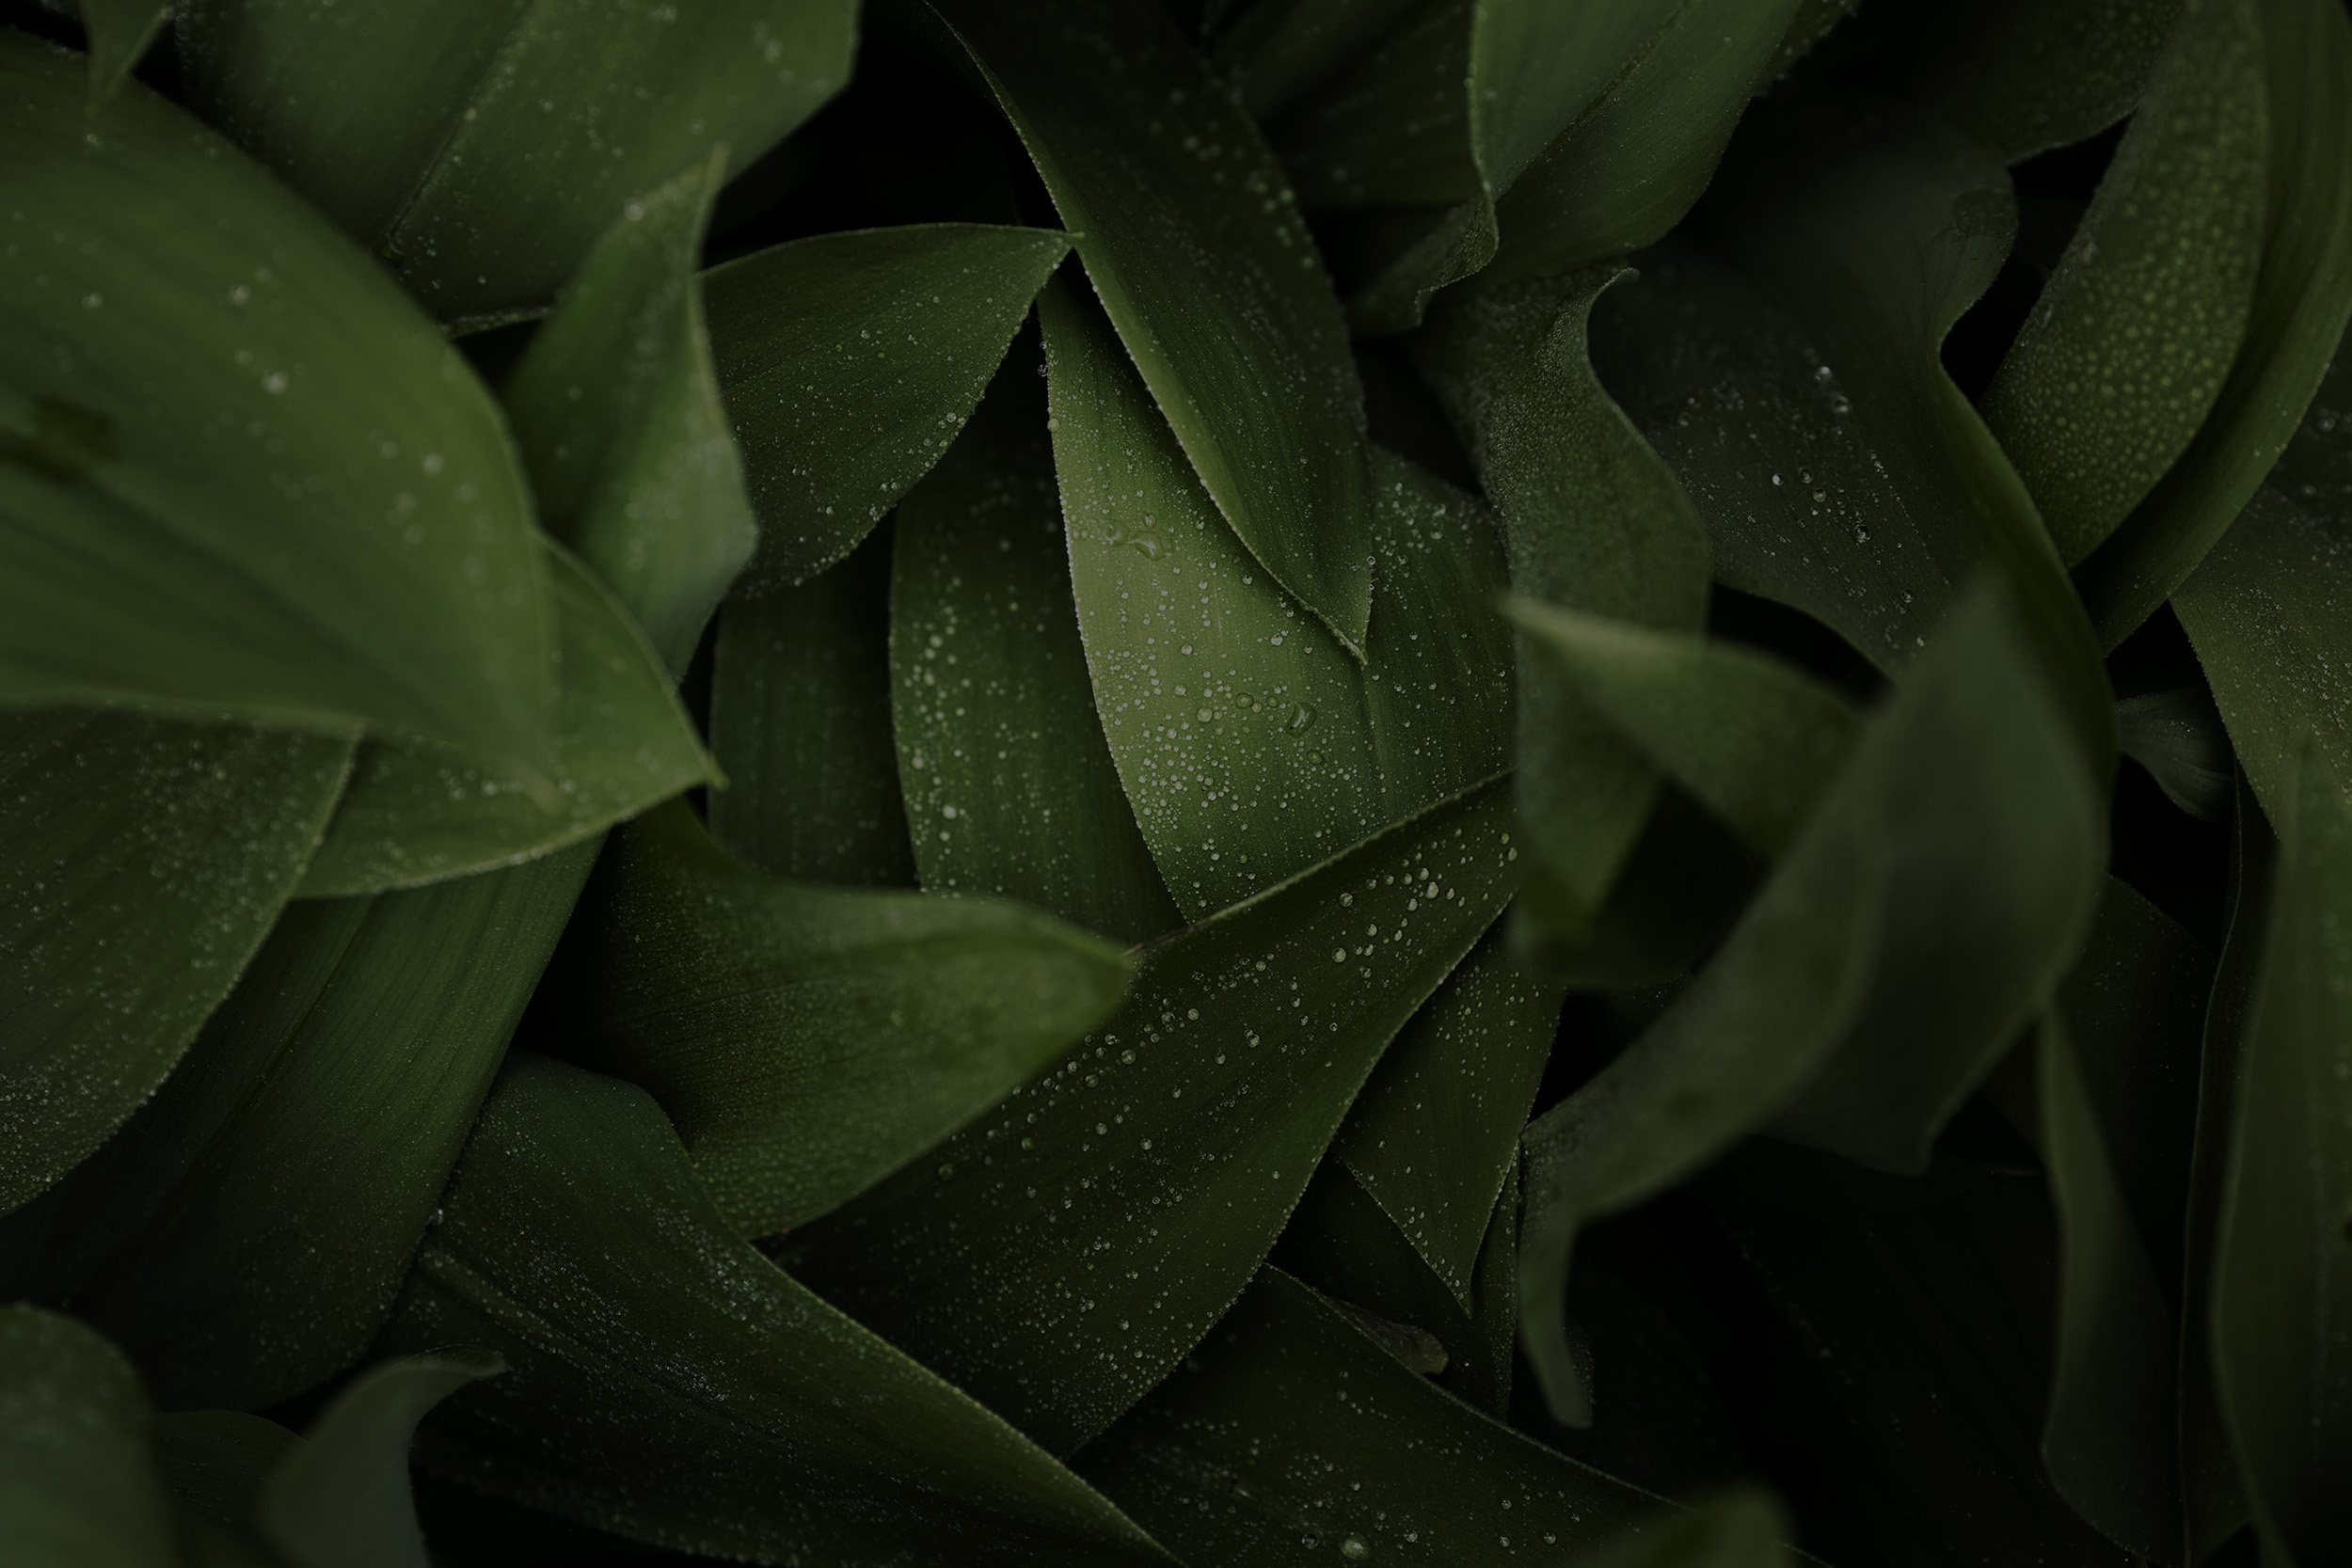 r297-close-up-green-leaves-nature-16969735336833.jpg